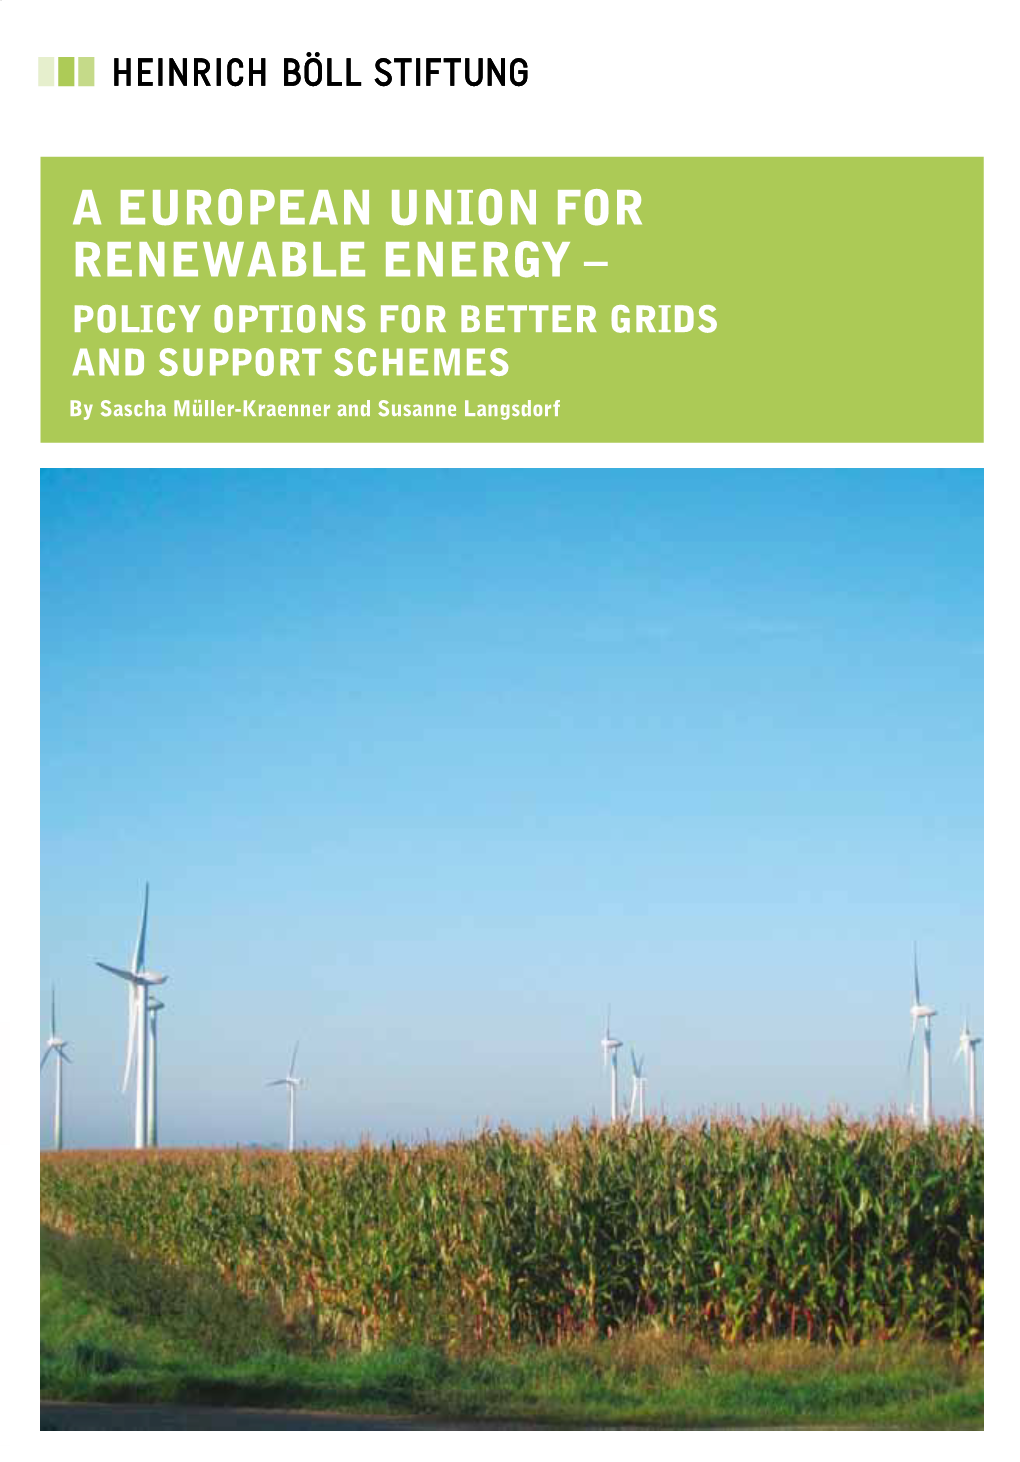 A European Union for Renewable Energy – Policy Options for Better Grids and Support Schemes by Sascha Müller-Kraenner and Susanne Langsdorf